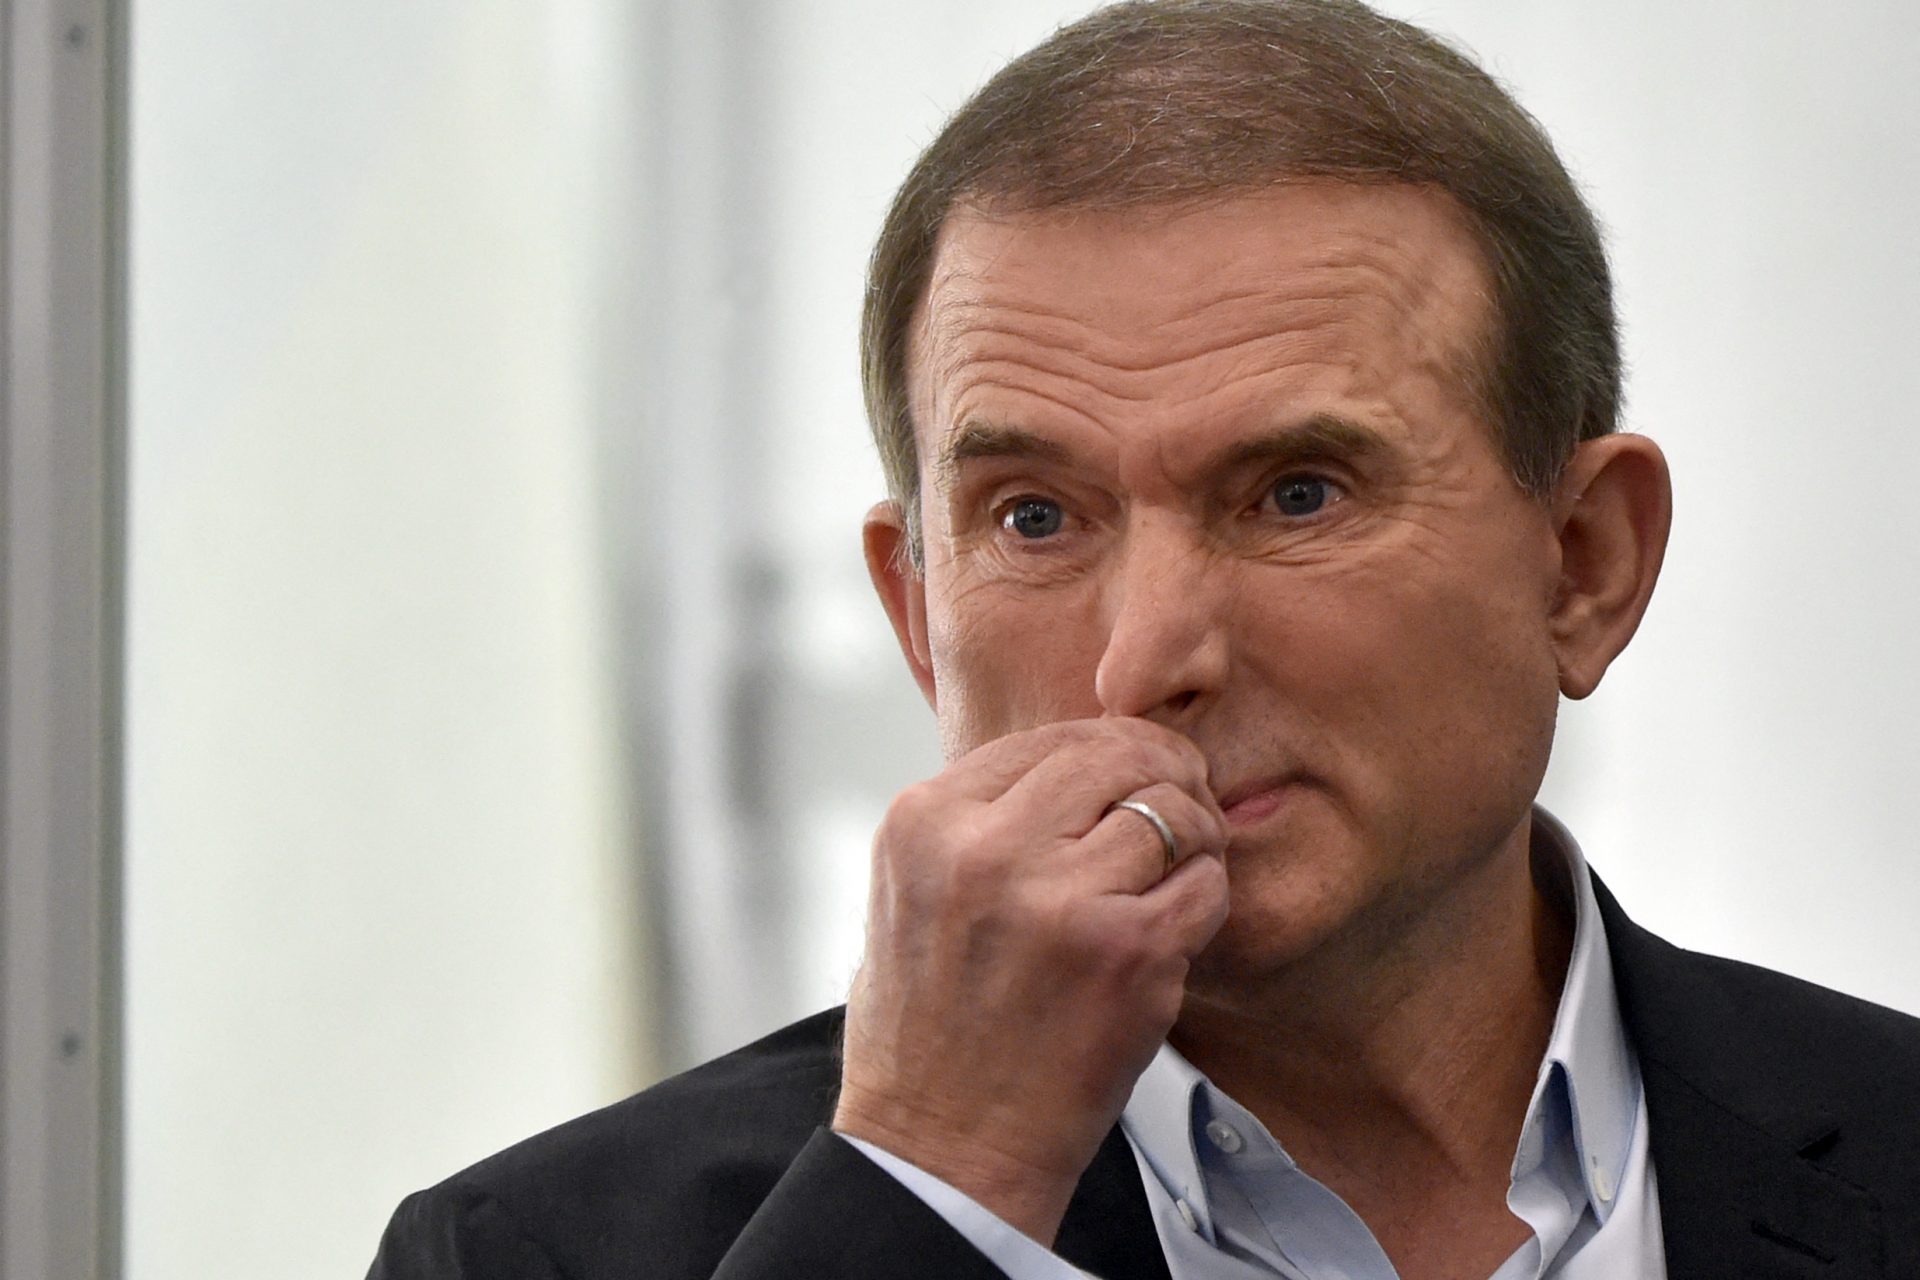 <p><span>Business Insider reported that Medvedchuk, a former Ukrainian lawmaker who had his citizenship revoked for his pro-Russian activities, was the owner of My Royal Romance but the story of the ship's detention is a complicated one. </span></p>